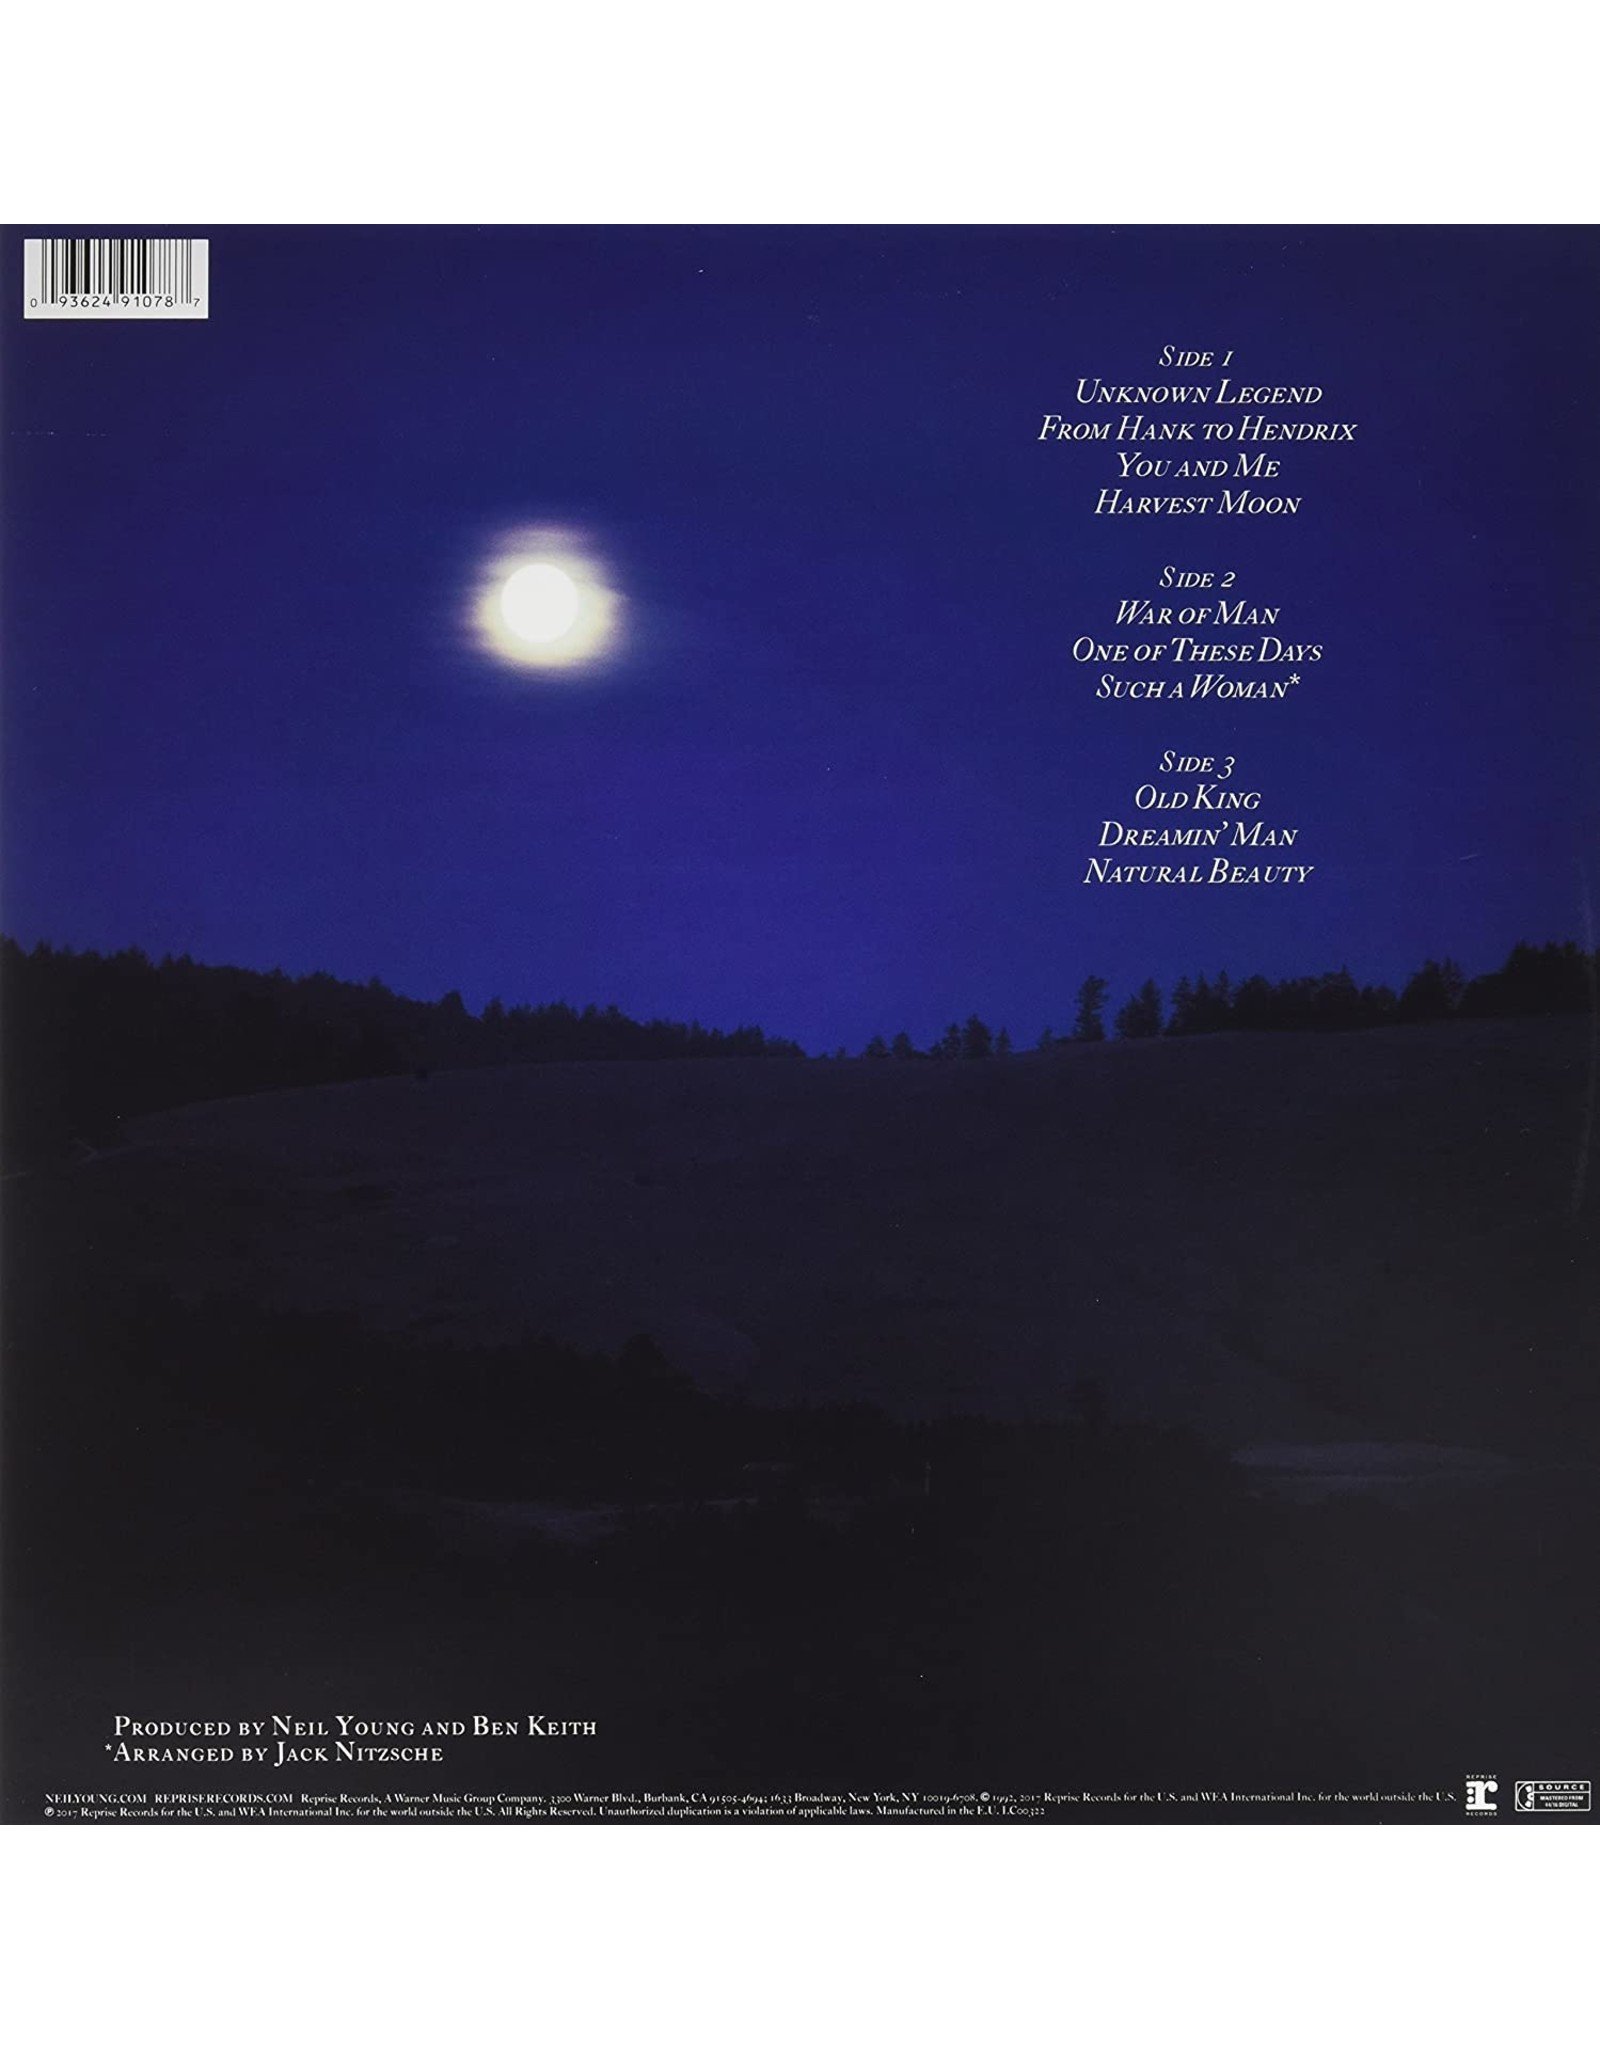 Neil Young - Harvest Moon